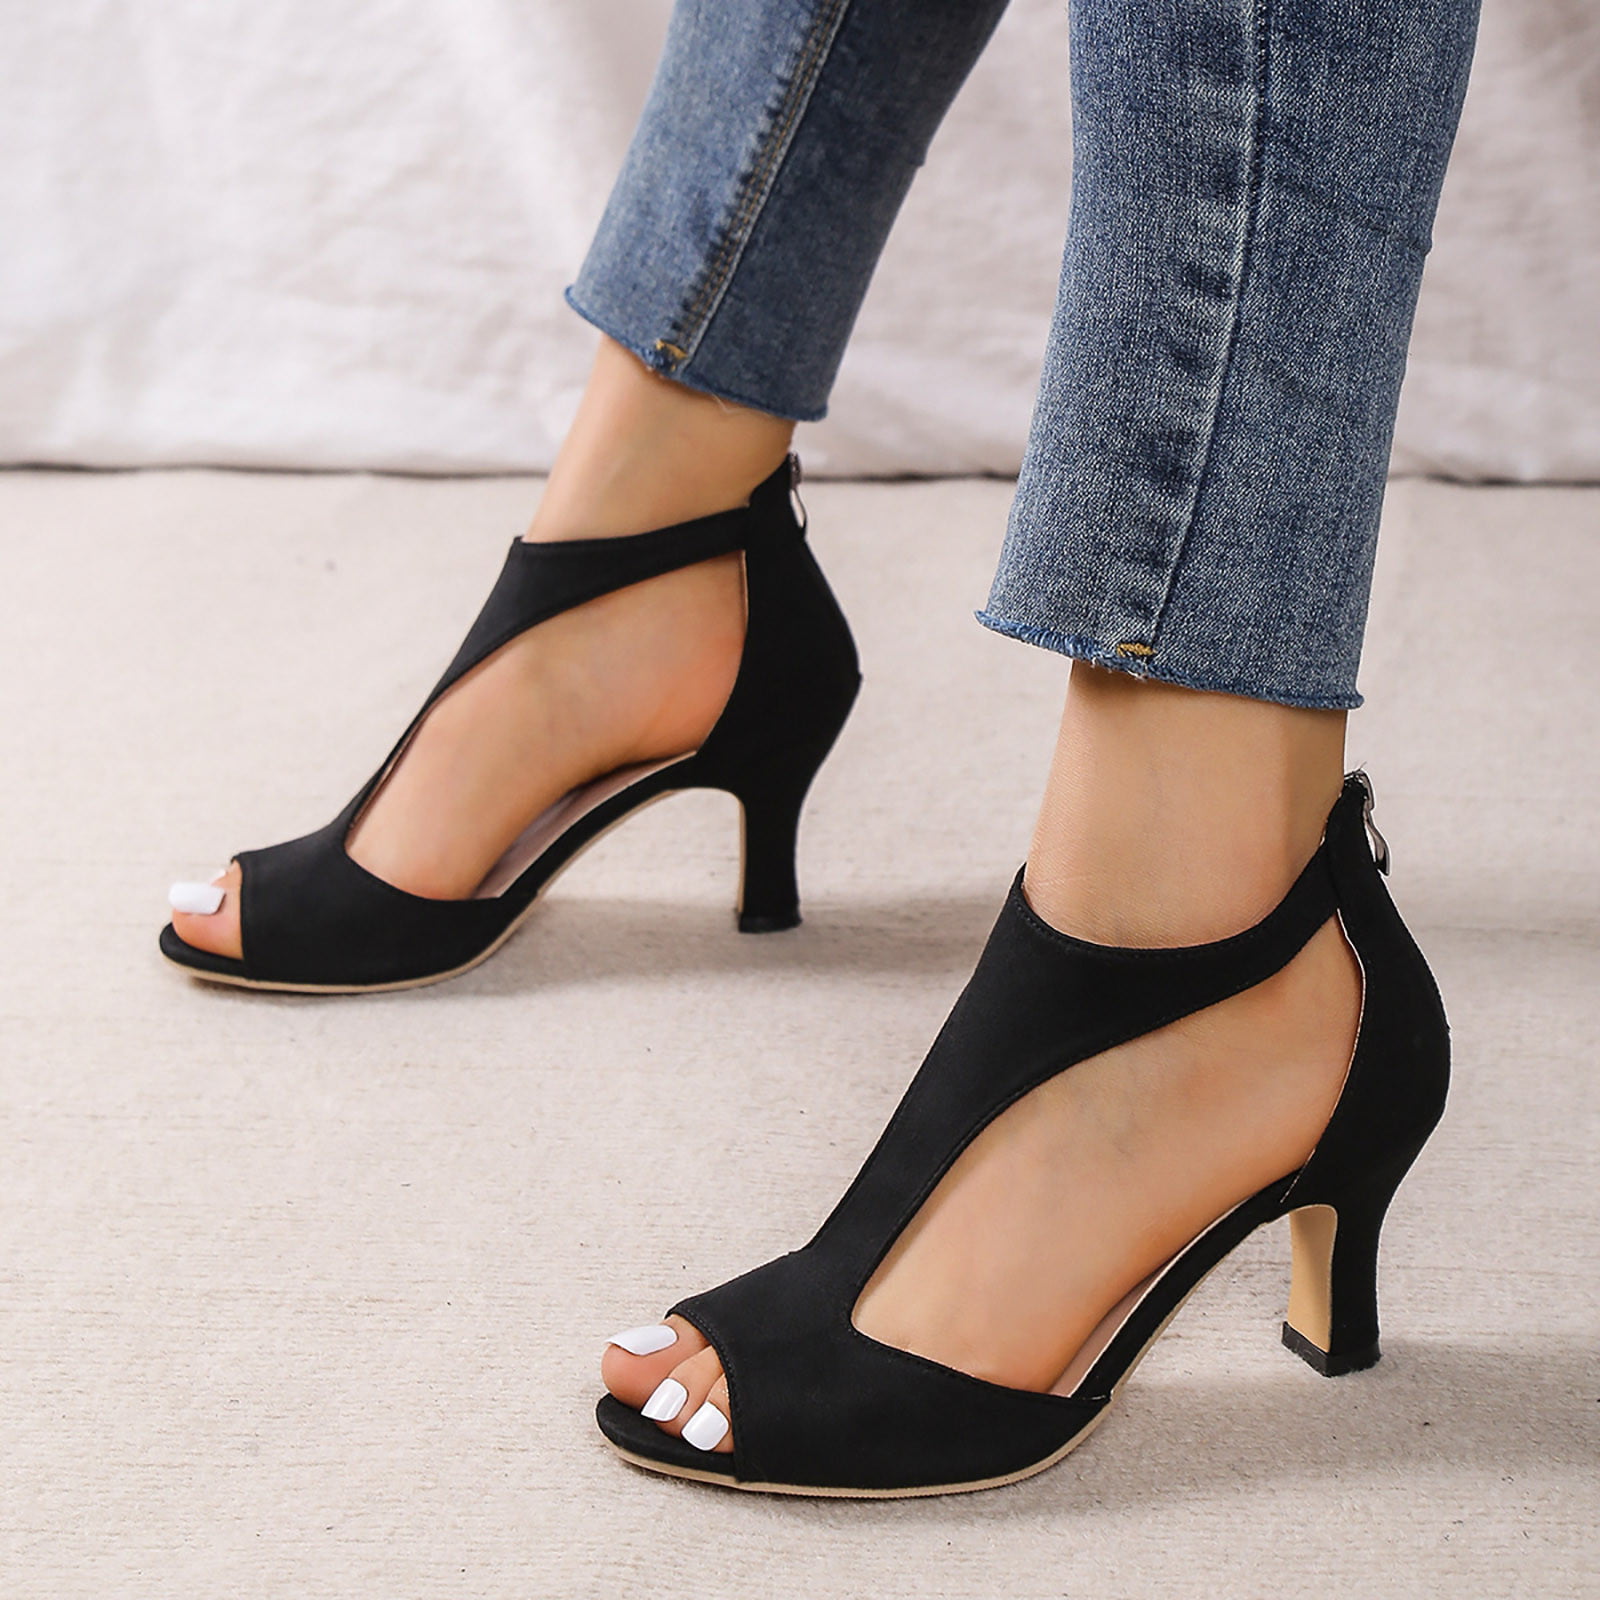 Pashion Footwear Review: Are Convertible Heels Too Good to Be True? |  Wirecutter